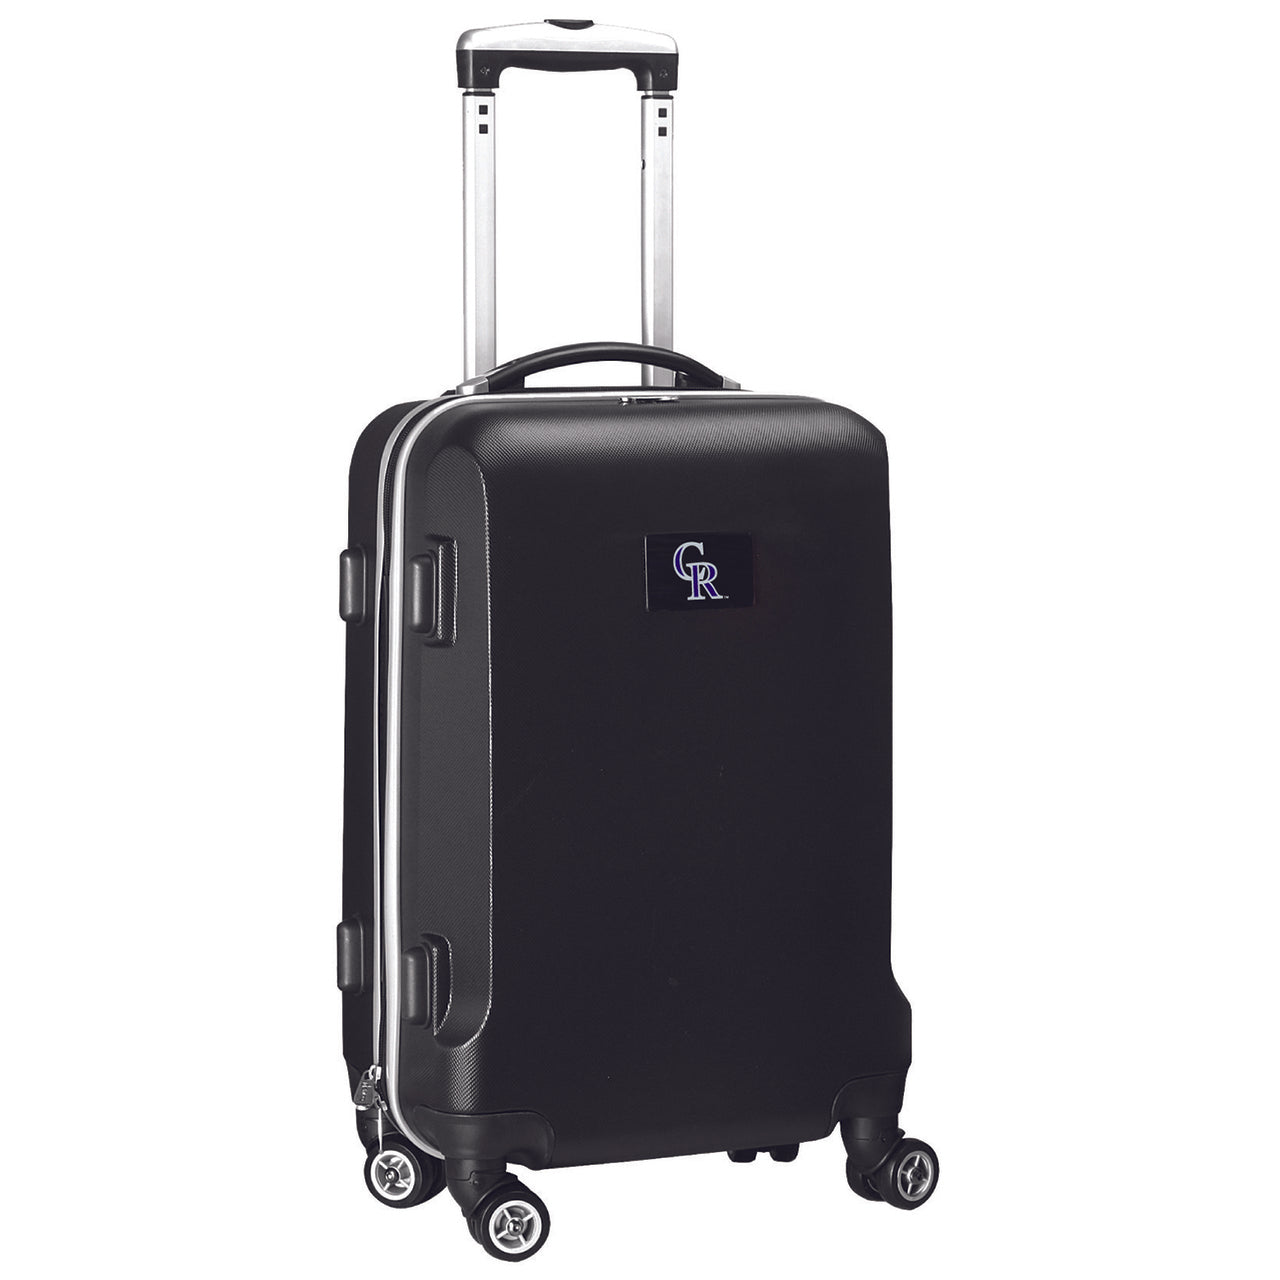 Colorado Rockies 20" Hardcase Luggage Carry-on Spinner